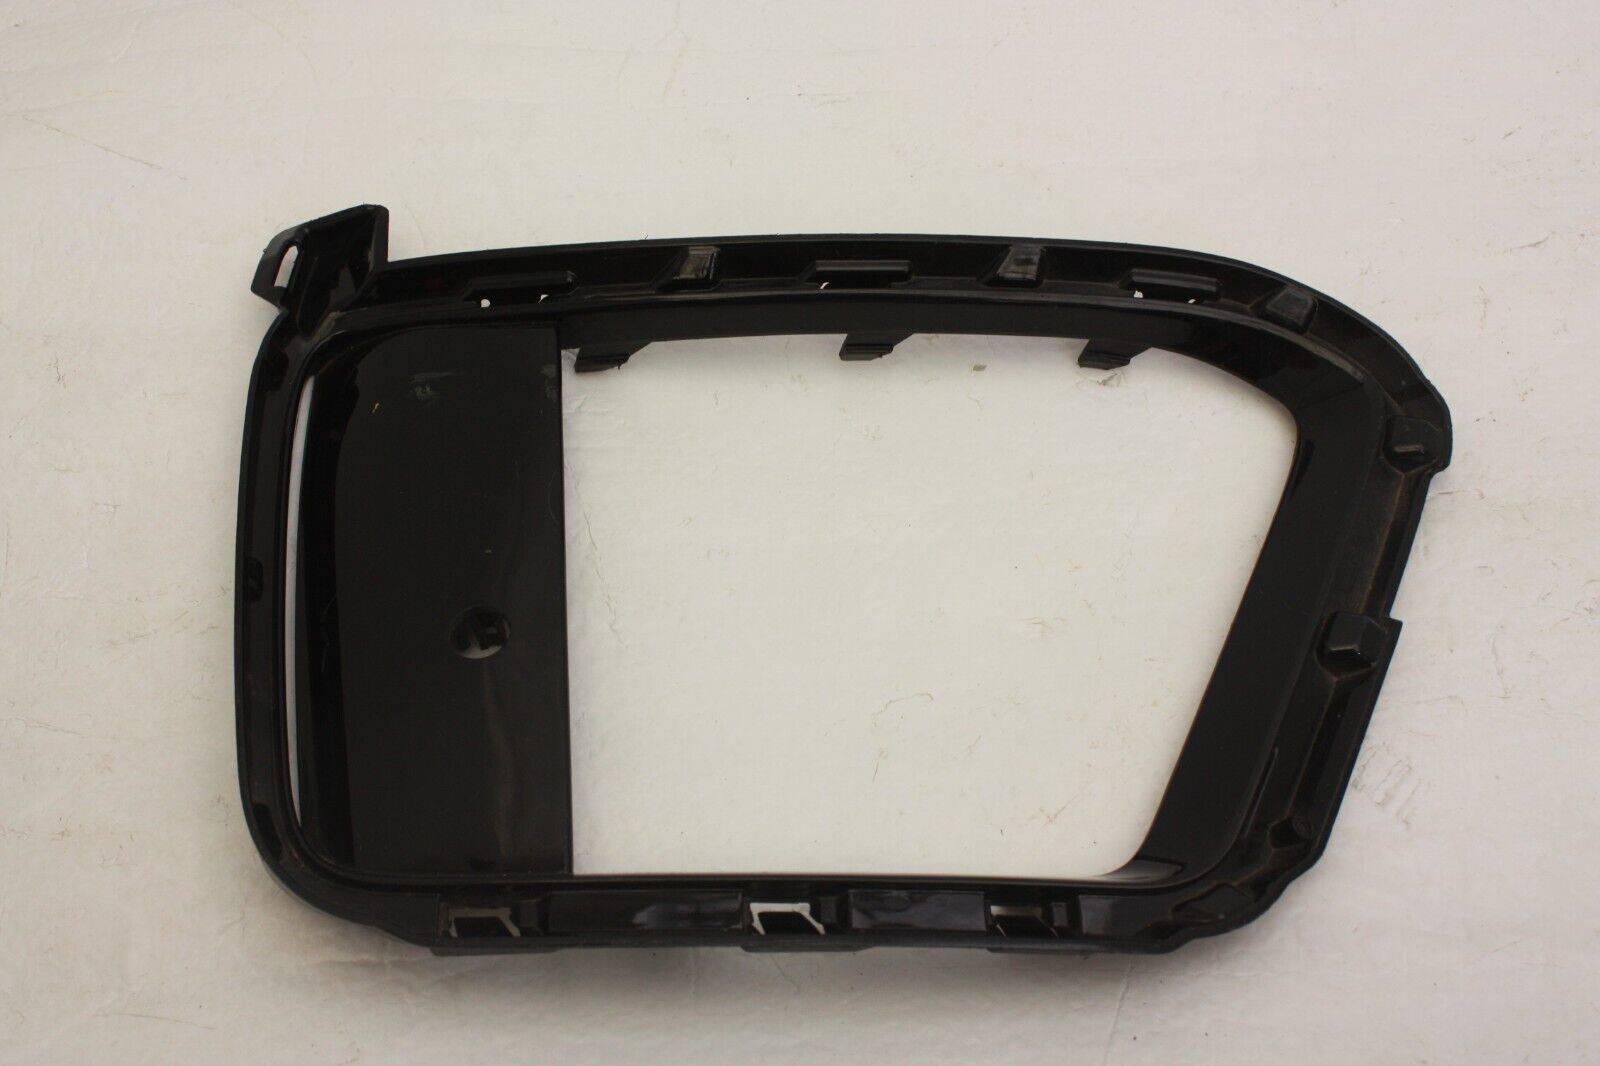 Range Rover Sport Front Bumper Right Grill Surround 2018 TO 2022 JK62 17F908 AB 176254366762